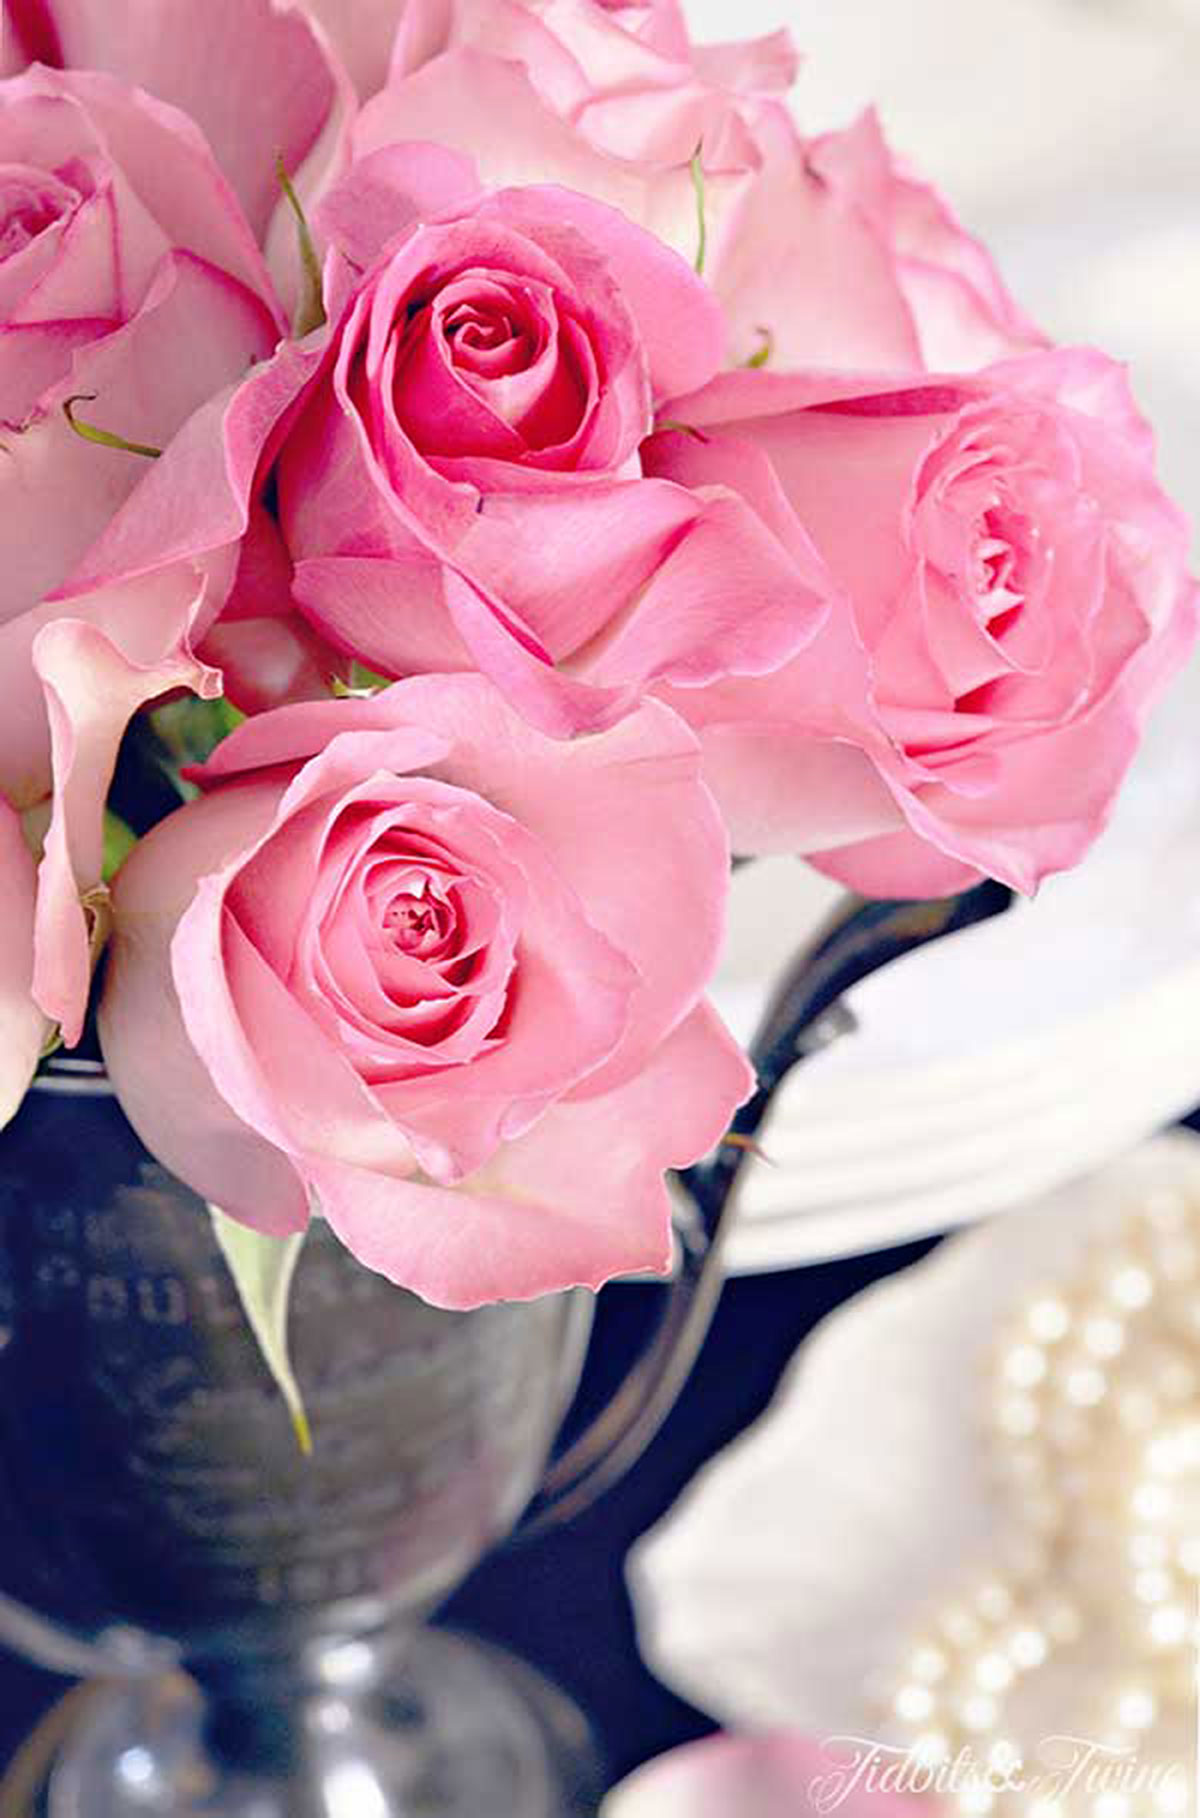 pink roses in an antique trophy with a plate holding a pearl necklace below